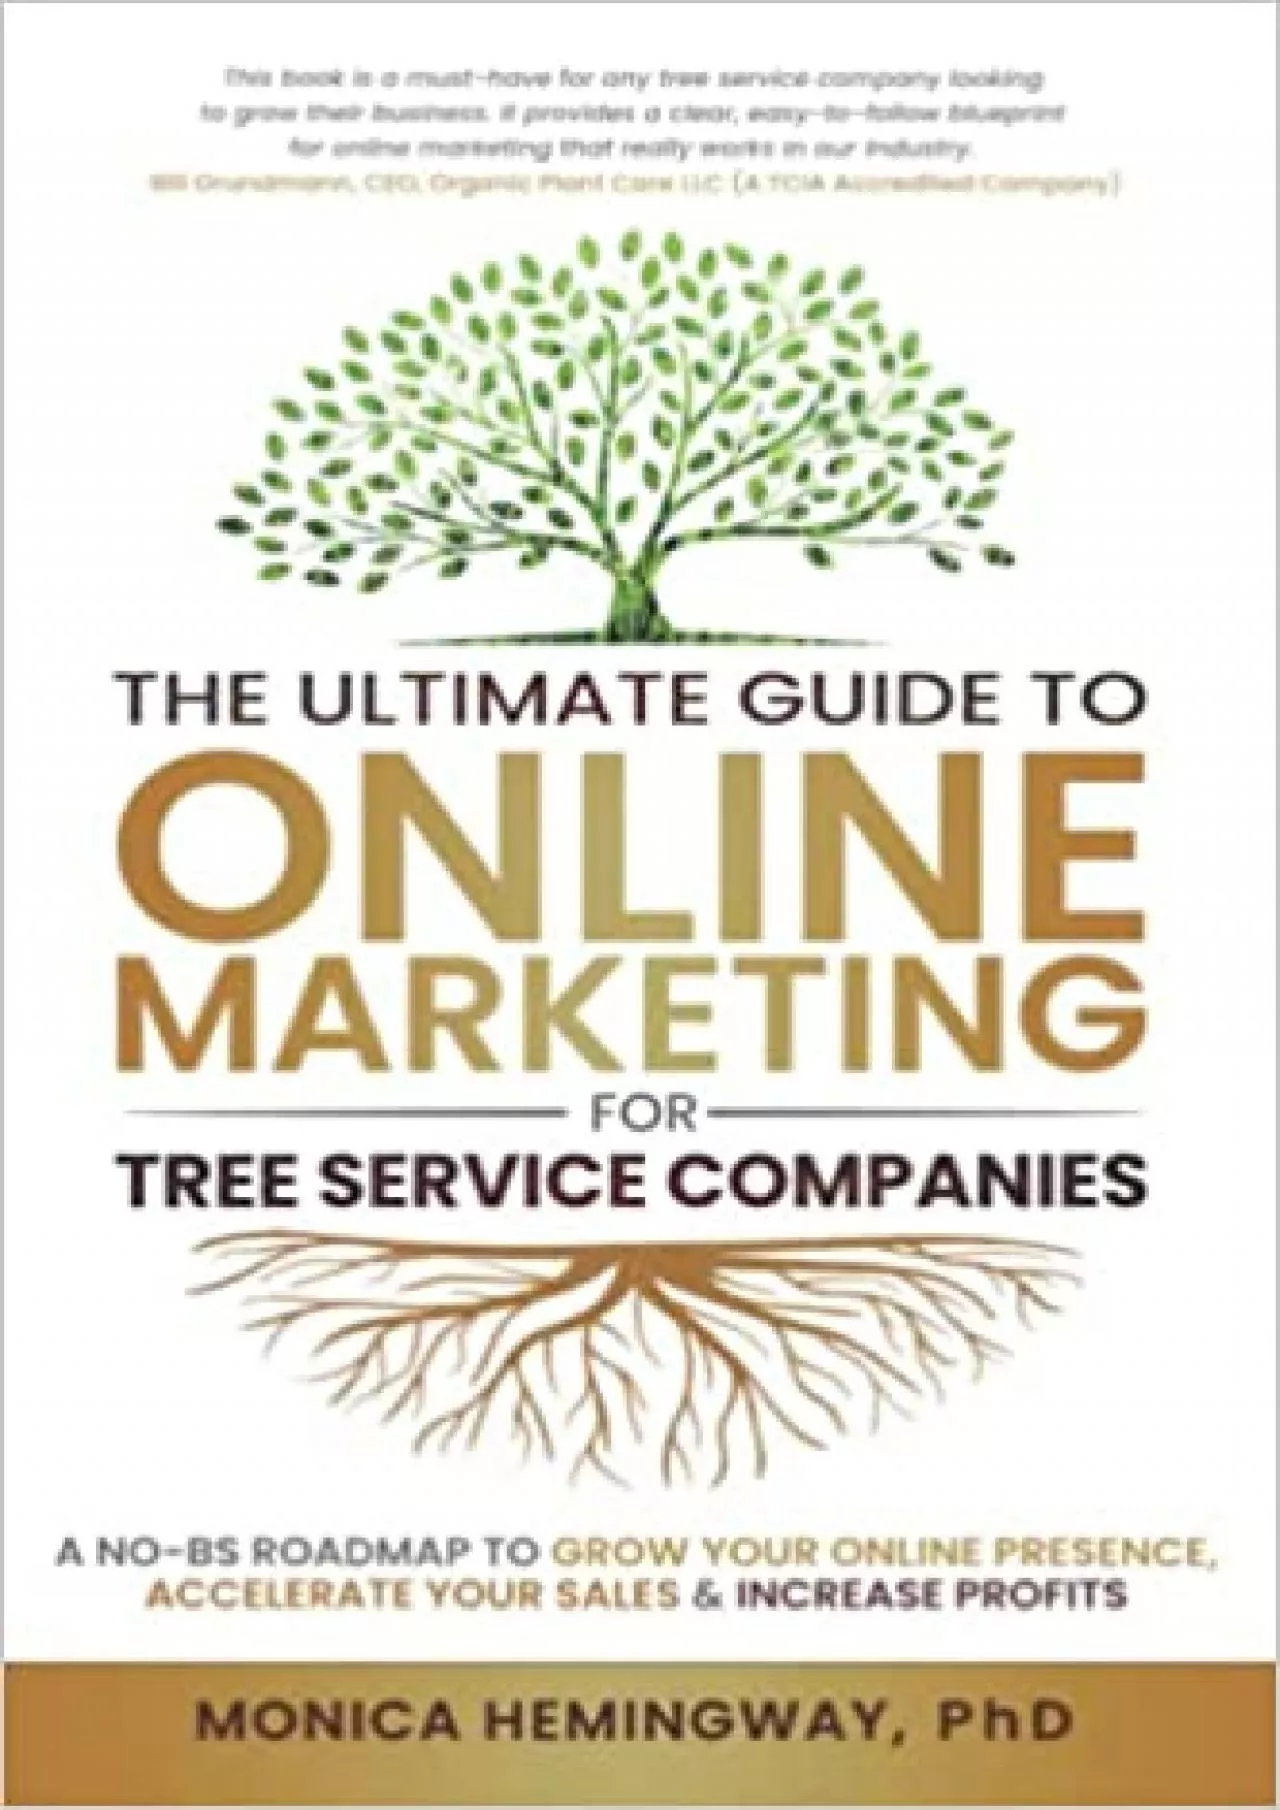 The Ultimate Guide to Online Marketing for Tree Service Companies A No-BS Roadmap to Grow